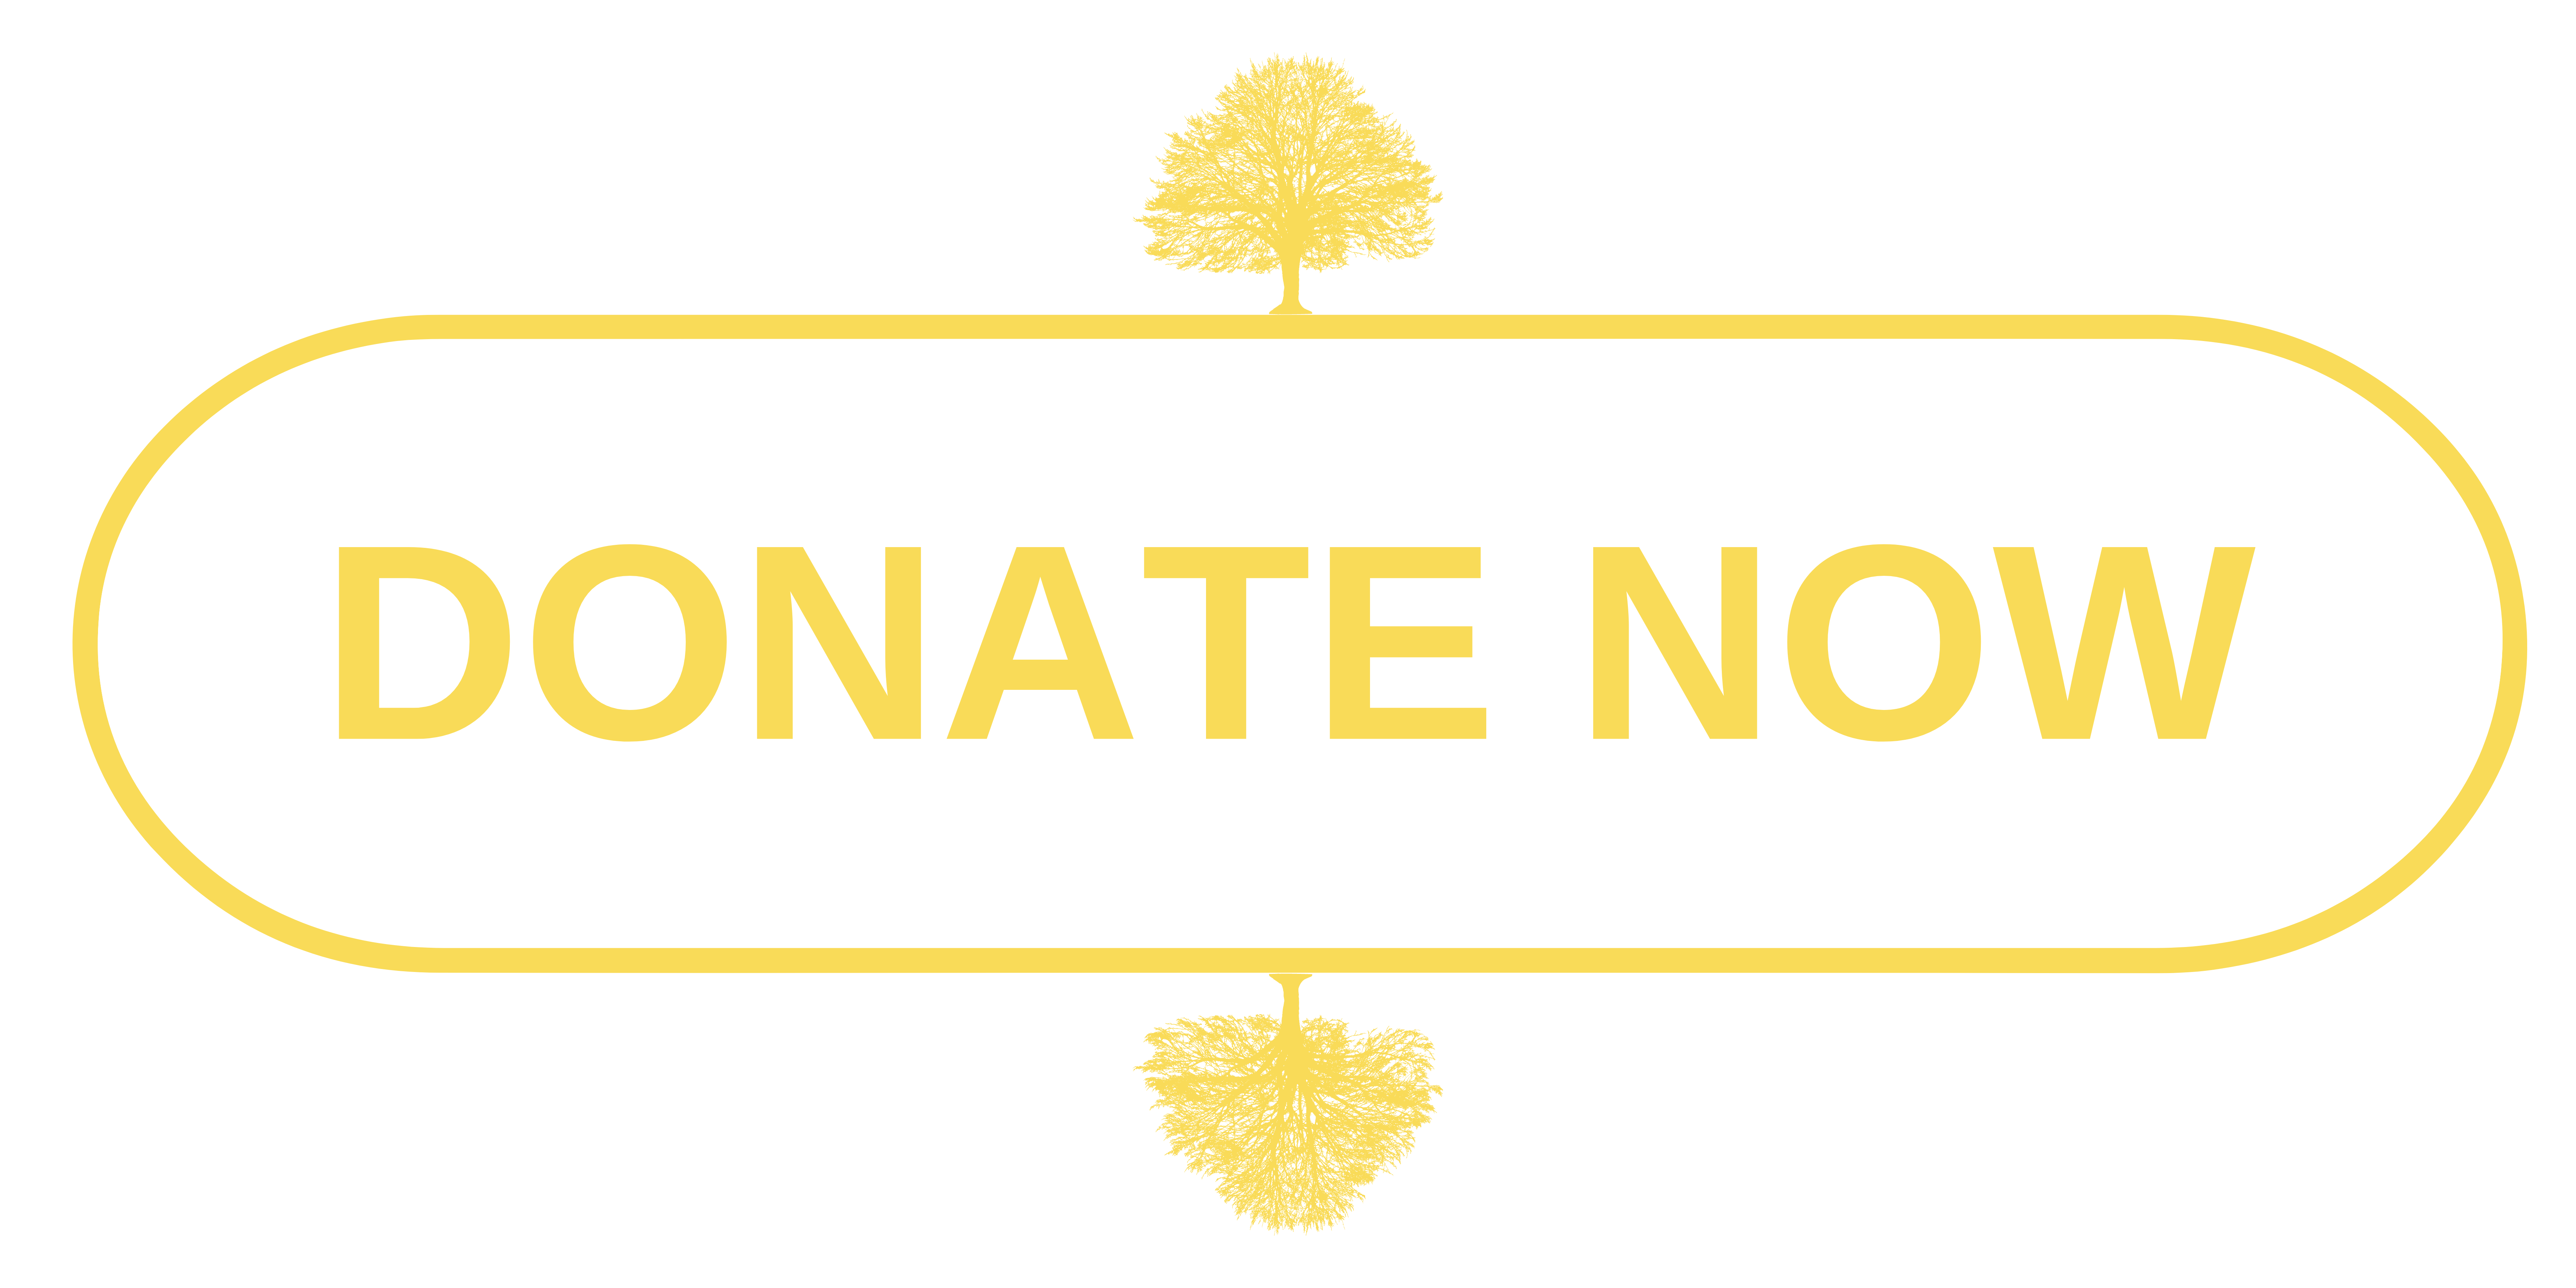 DONATE NOW BUTTON